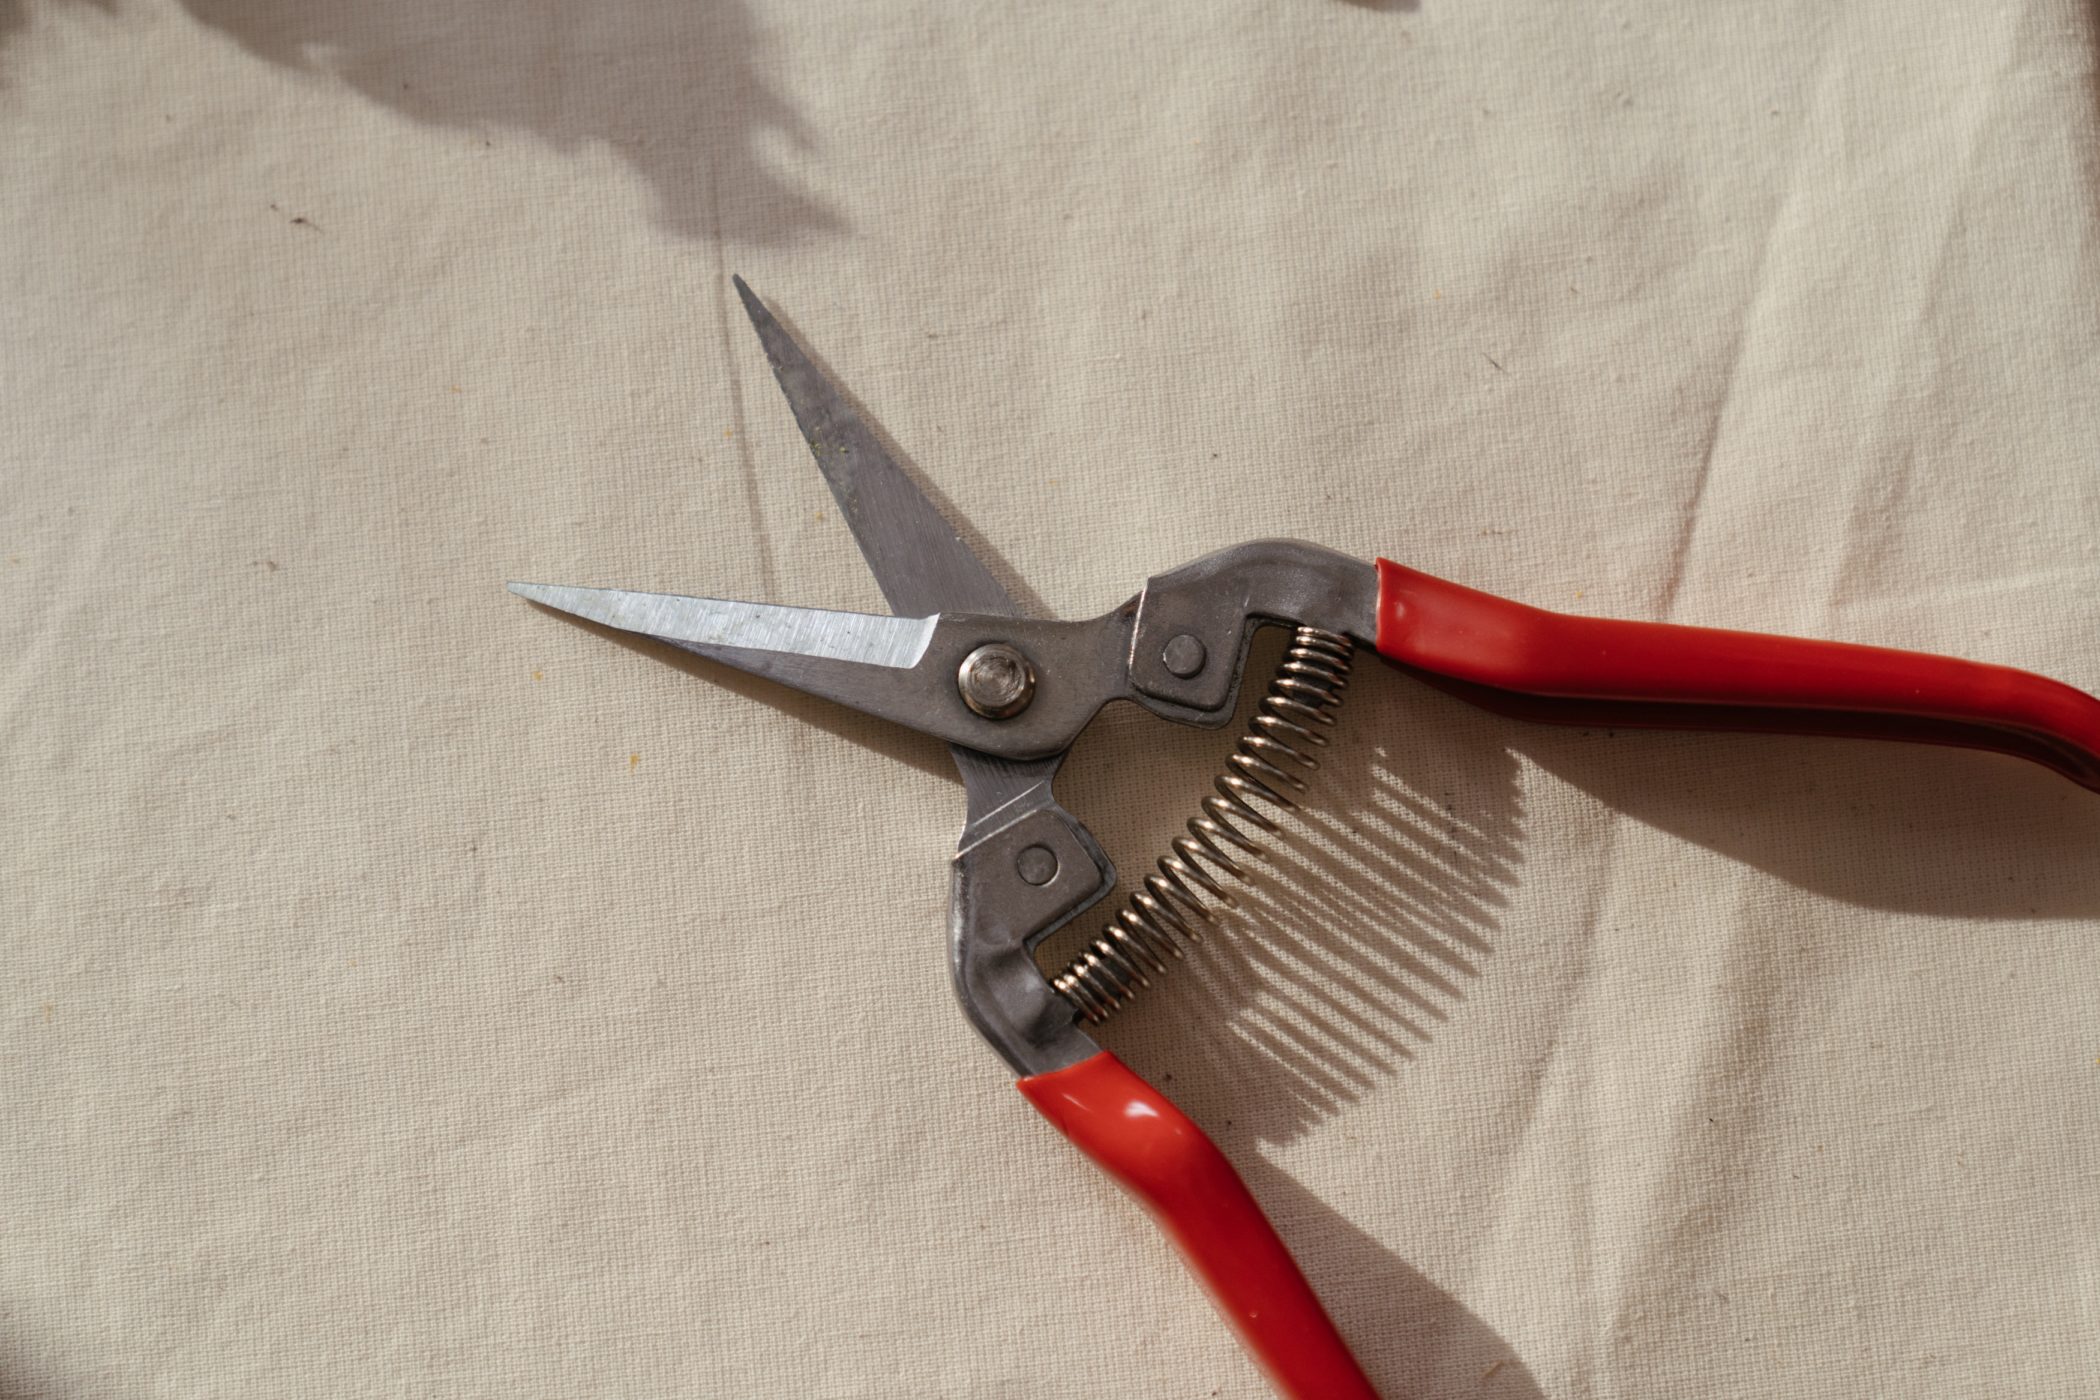 A pair of gardening snips on a cotton sheet